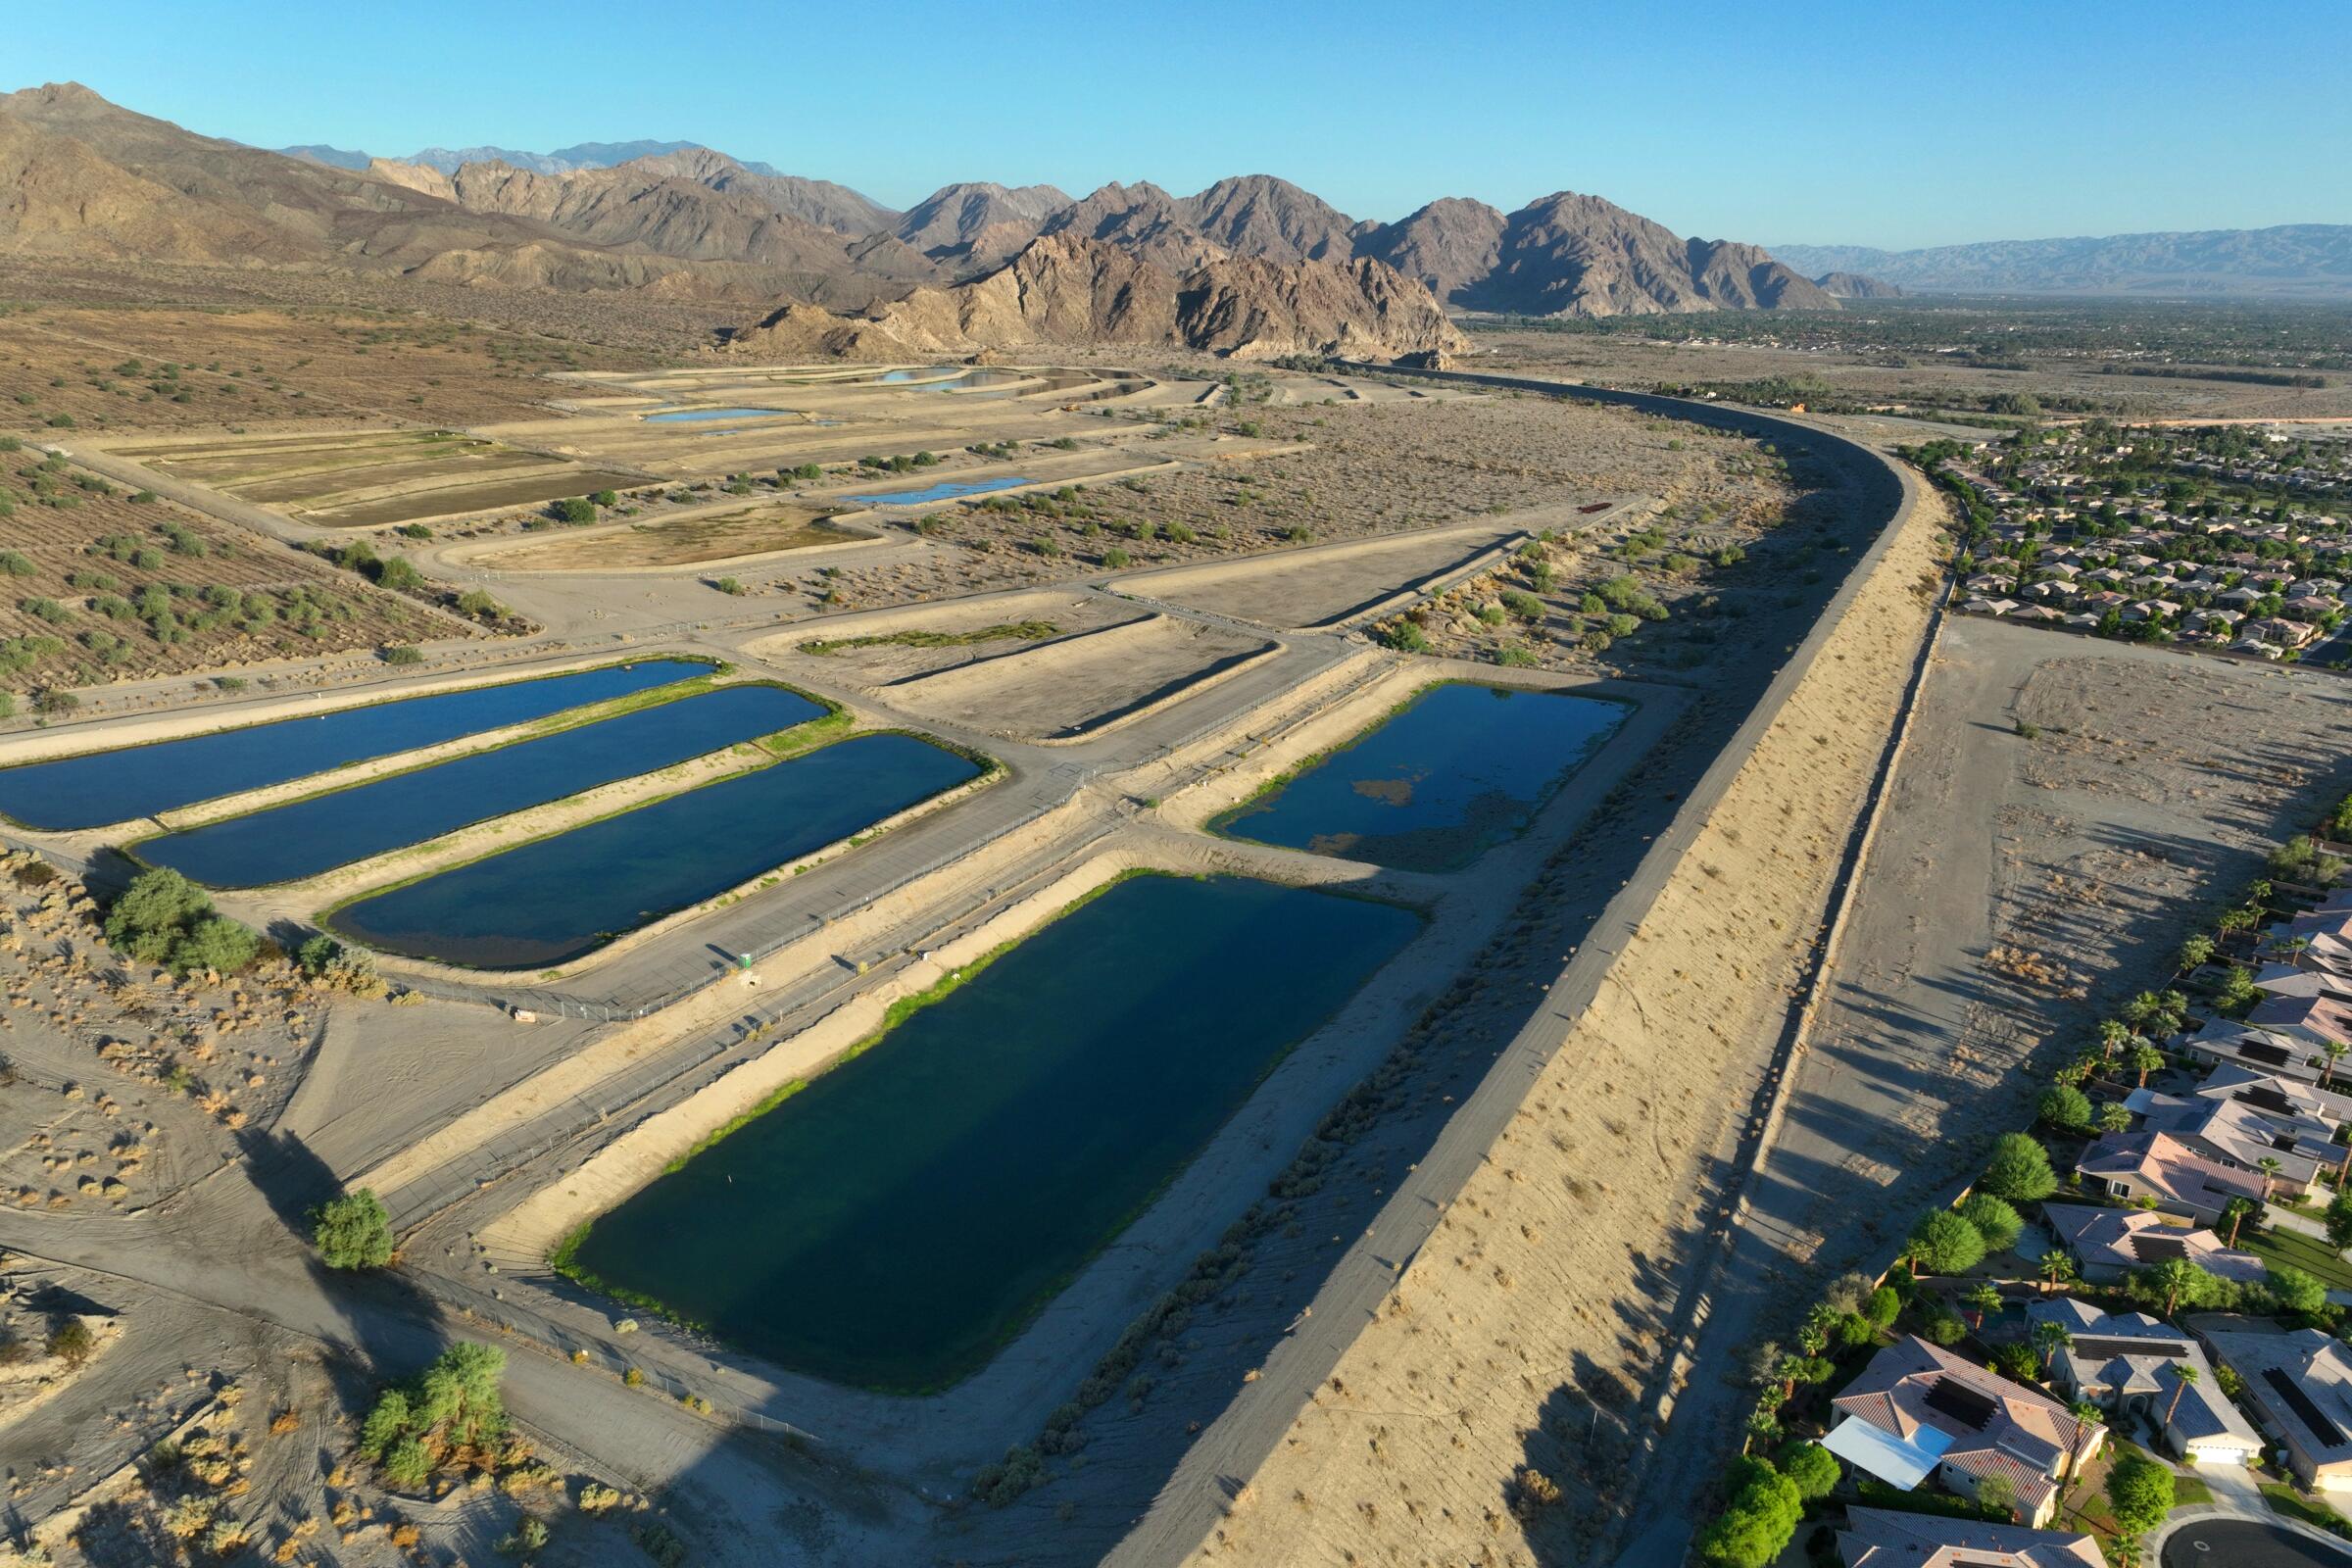 The end of the Coachella Canal, where the Colorado River water is routed to ponds at a groundwater replenishment facility